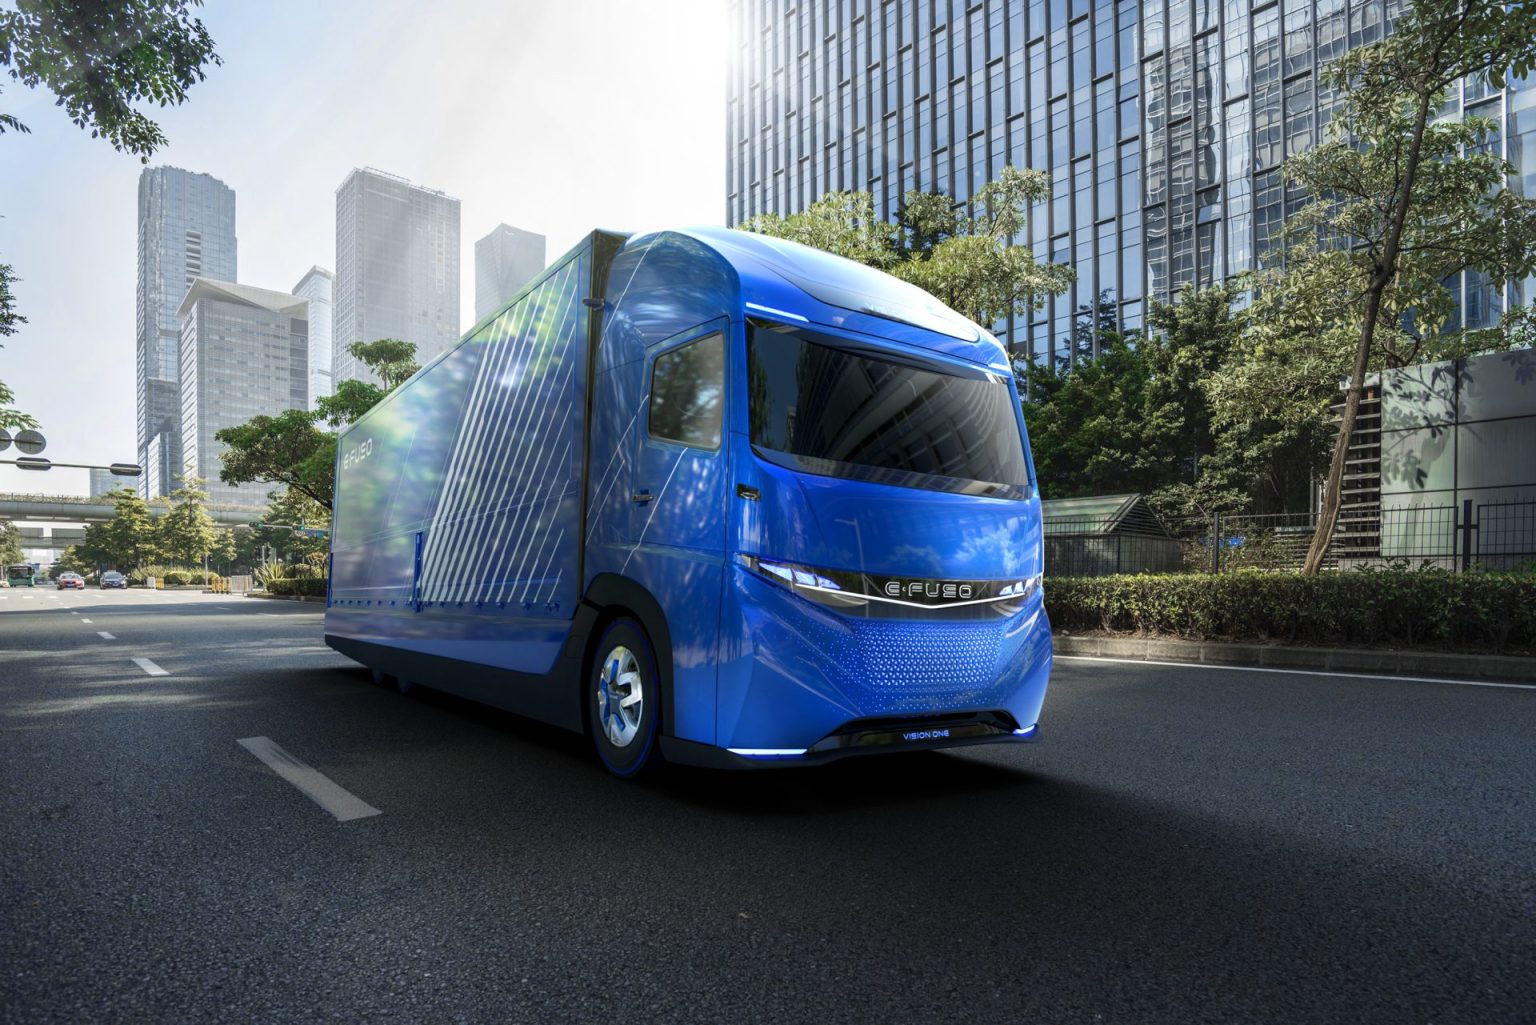 Daimler Truck,Mitsubishi Fuso,Hino,Toyota,MoU,advanced technologies,carbon neutrality,merging,MFTBC,commercial vehicle development,CASE technologies,global competition,sustainable mobility,collaboration,sustainable trucking,sustainable transportation,sustainable transportation examples